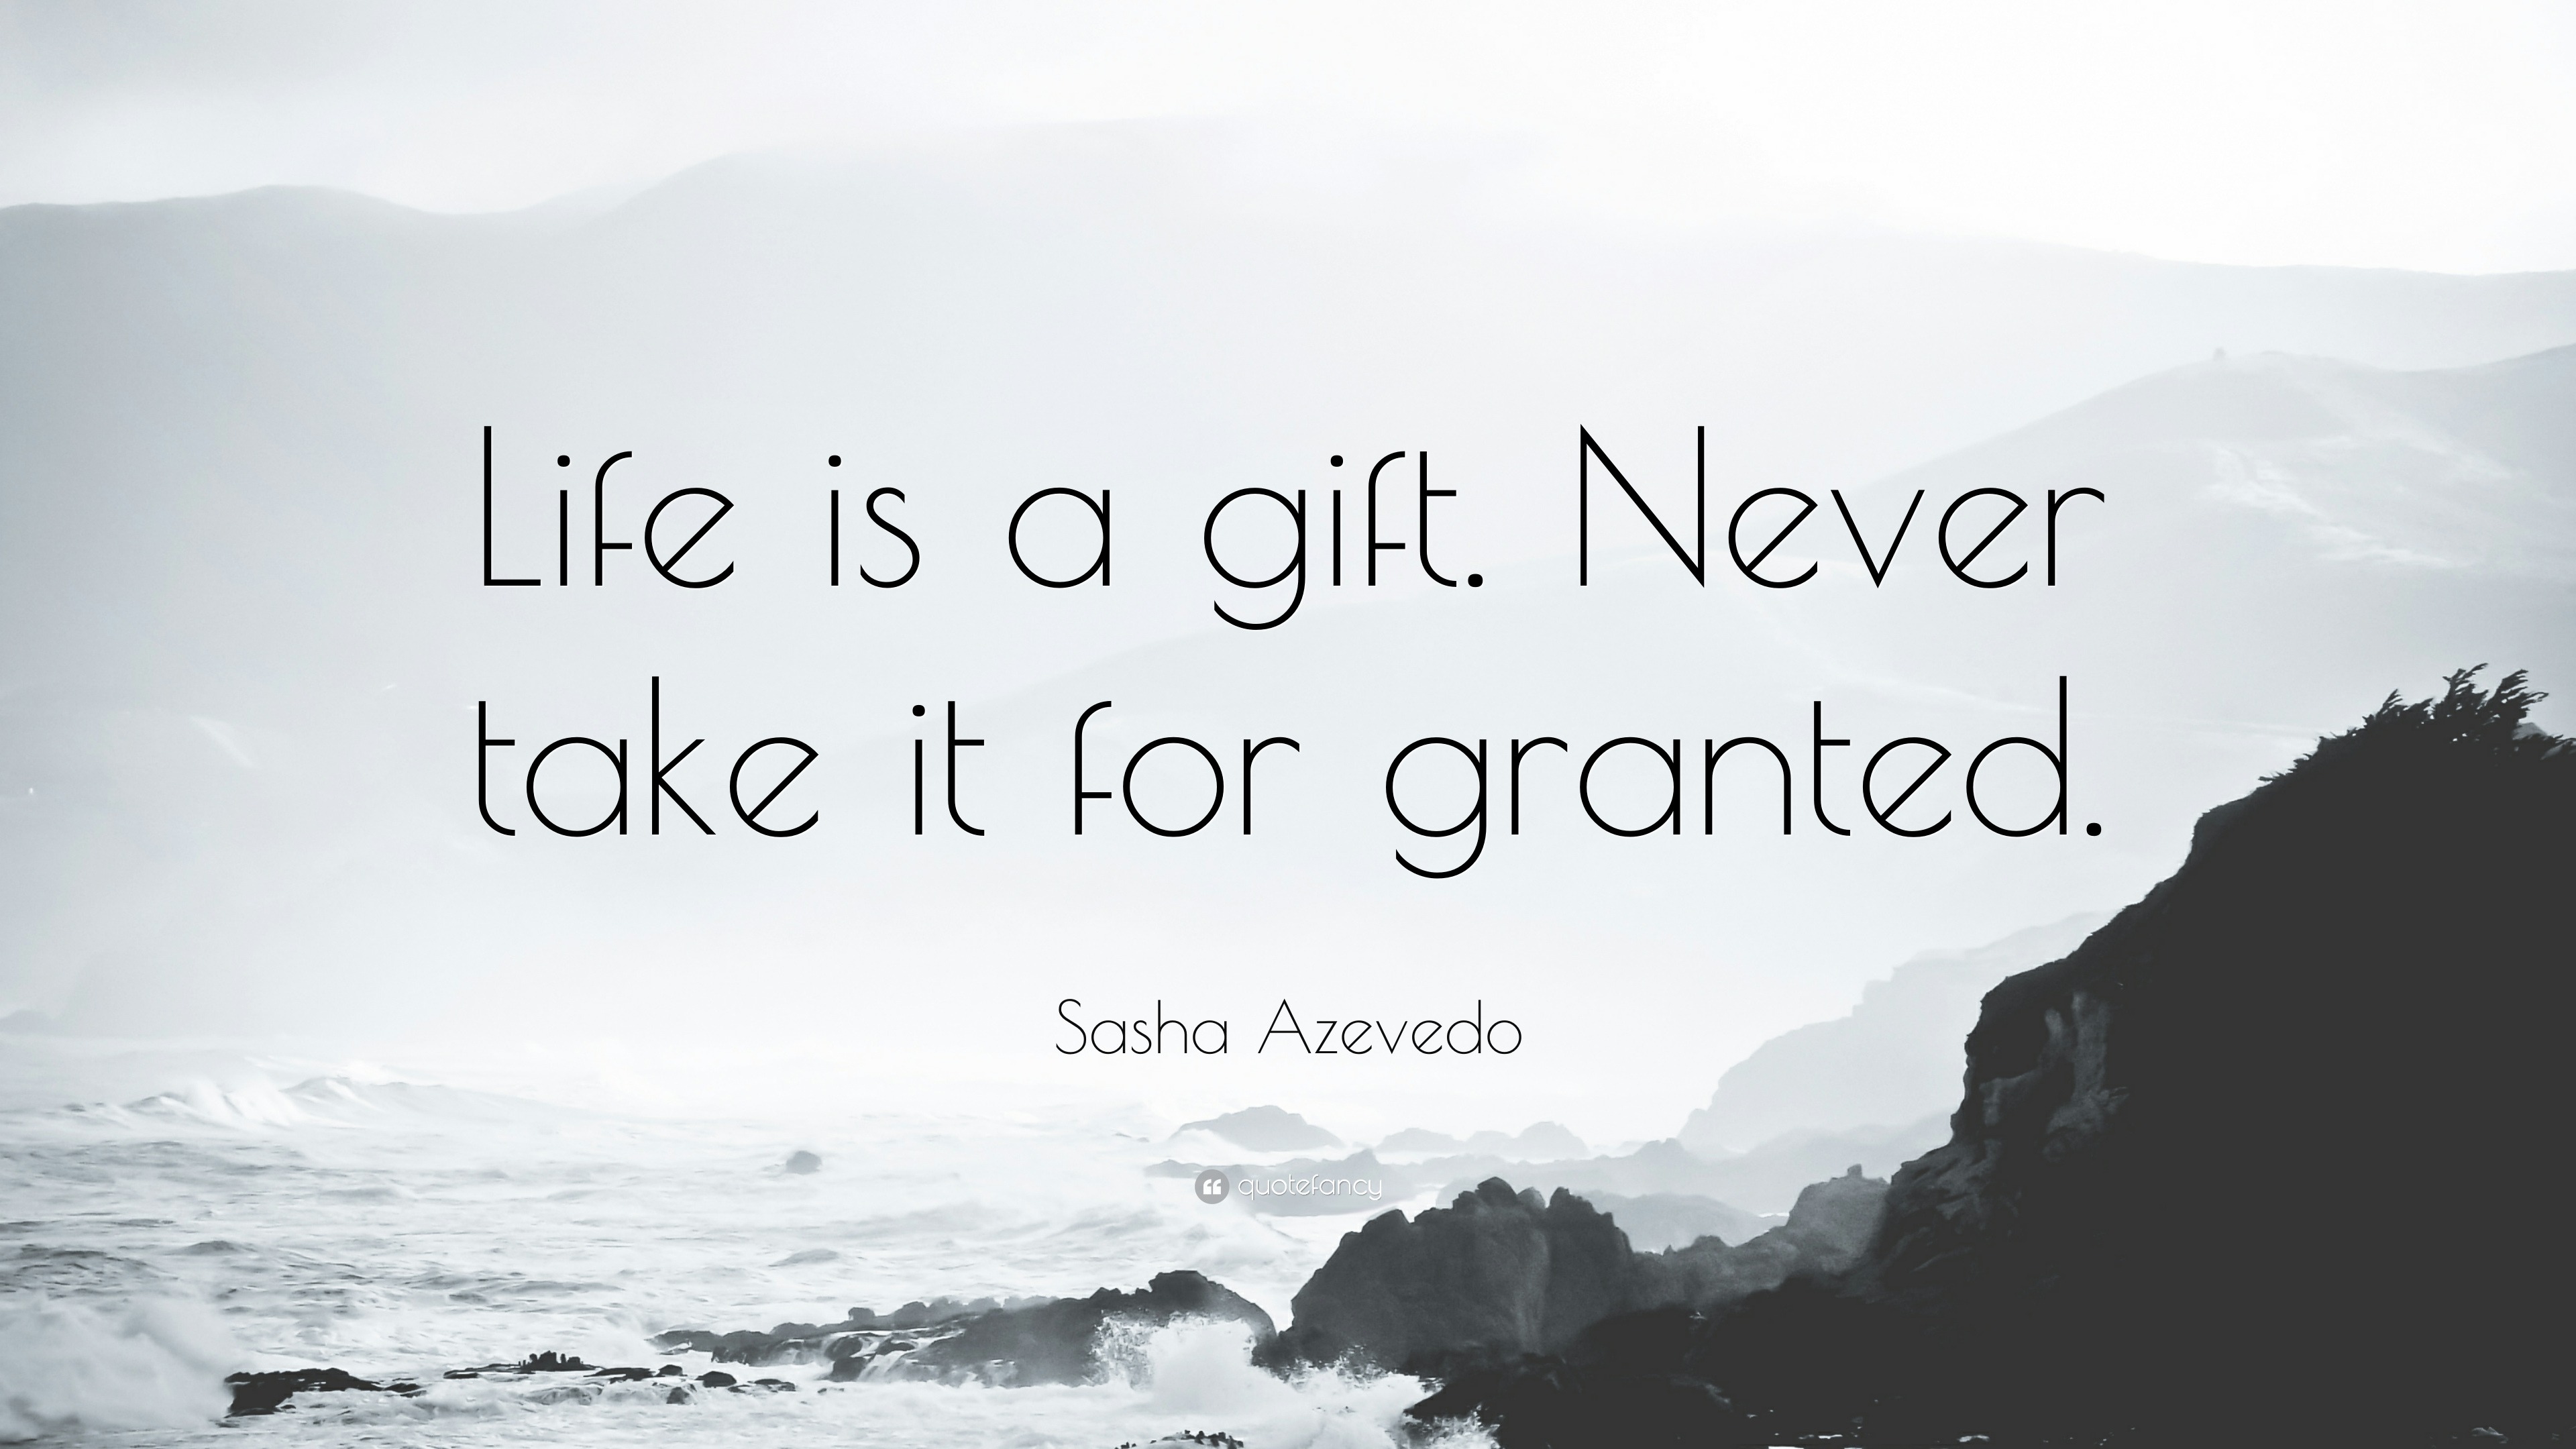 Sasha Azevedo Quote “Life is a t Never take it for granted